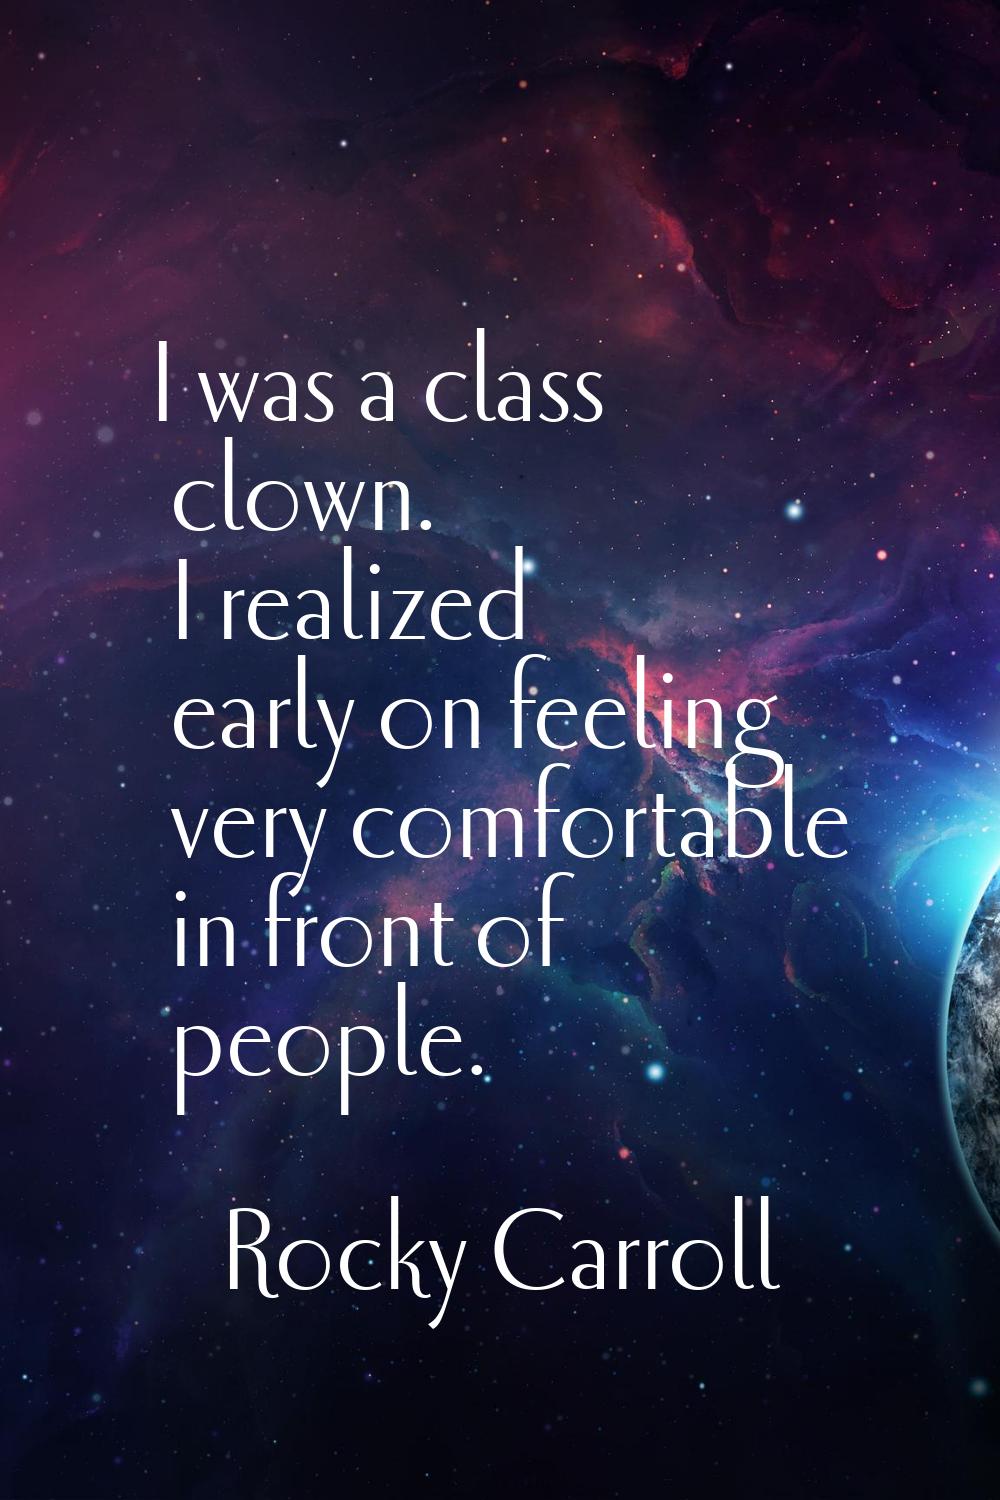 I was a class clown. I realized early on feeling very comfortable in front of people.